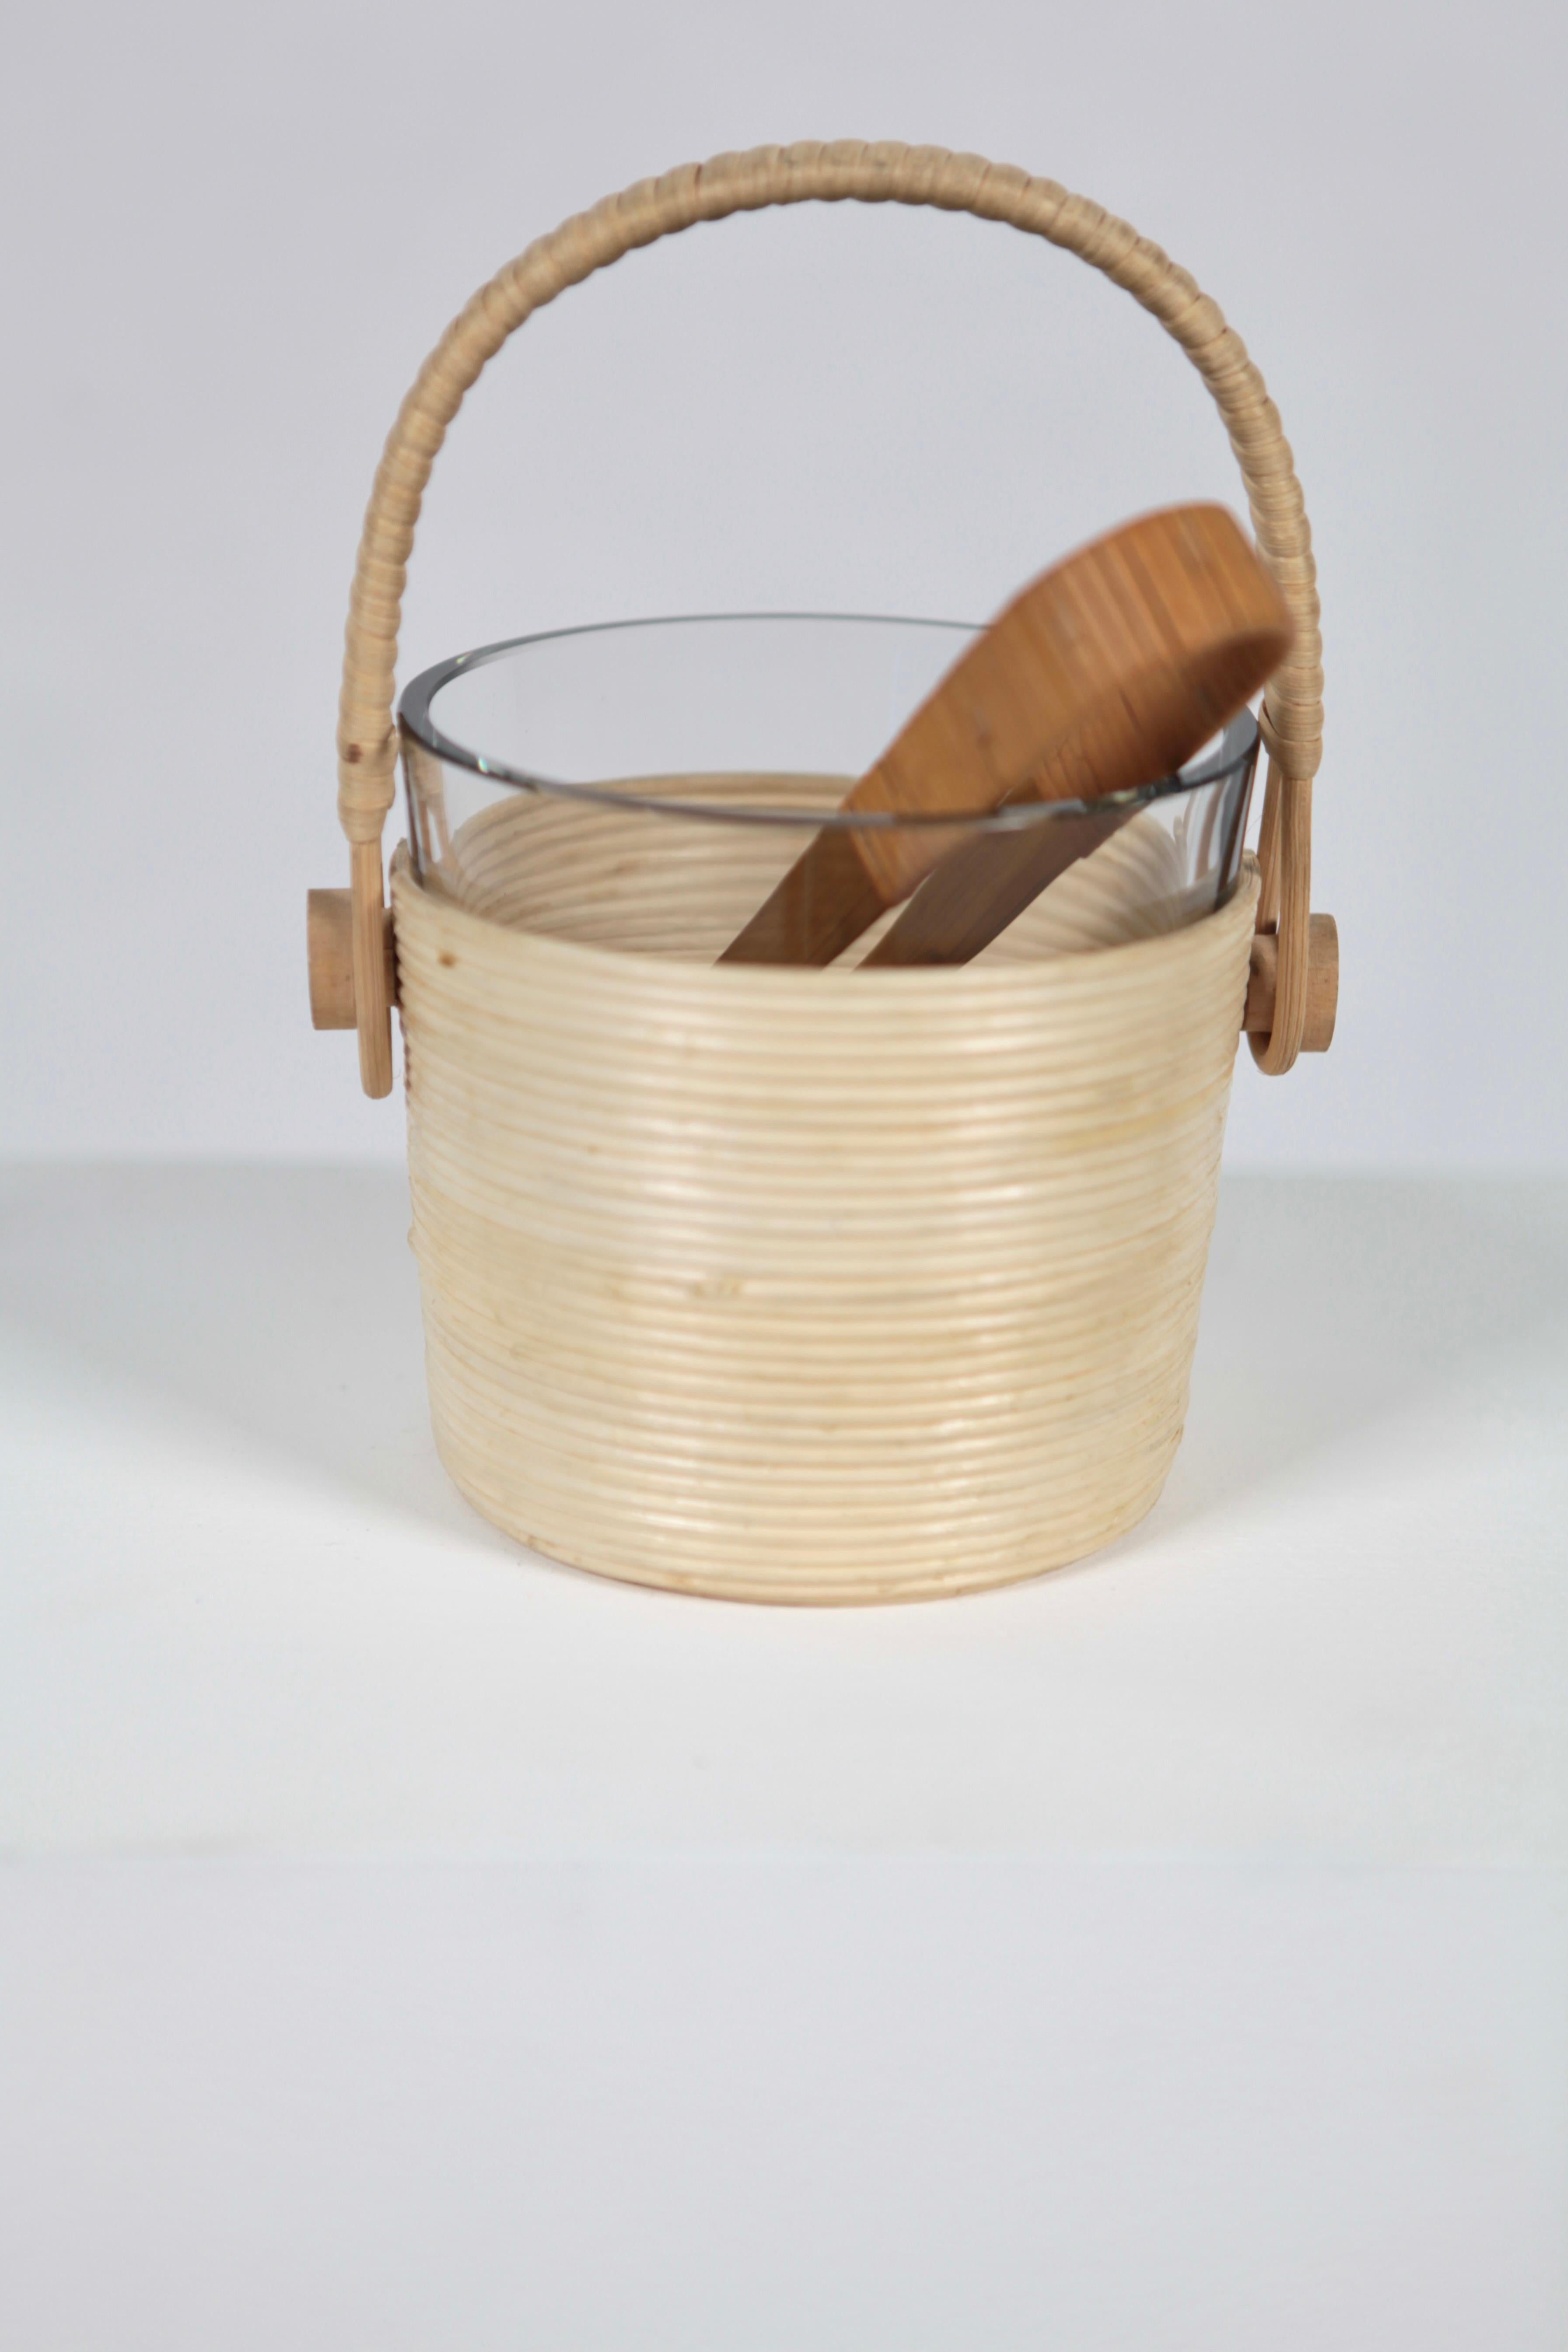 Ice cube cooler or bucket, designed by Kaj Franck.
Manufactured in bamboo, rattan & glass, the ice tong in brass & rattan.
Executed in Finland, 1954.
Excellent condition.